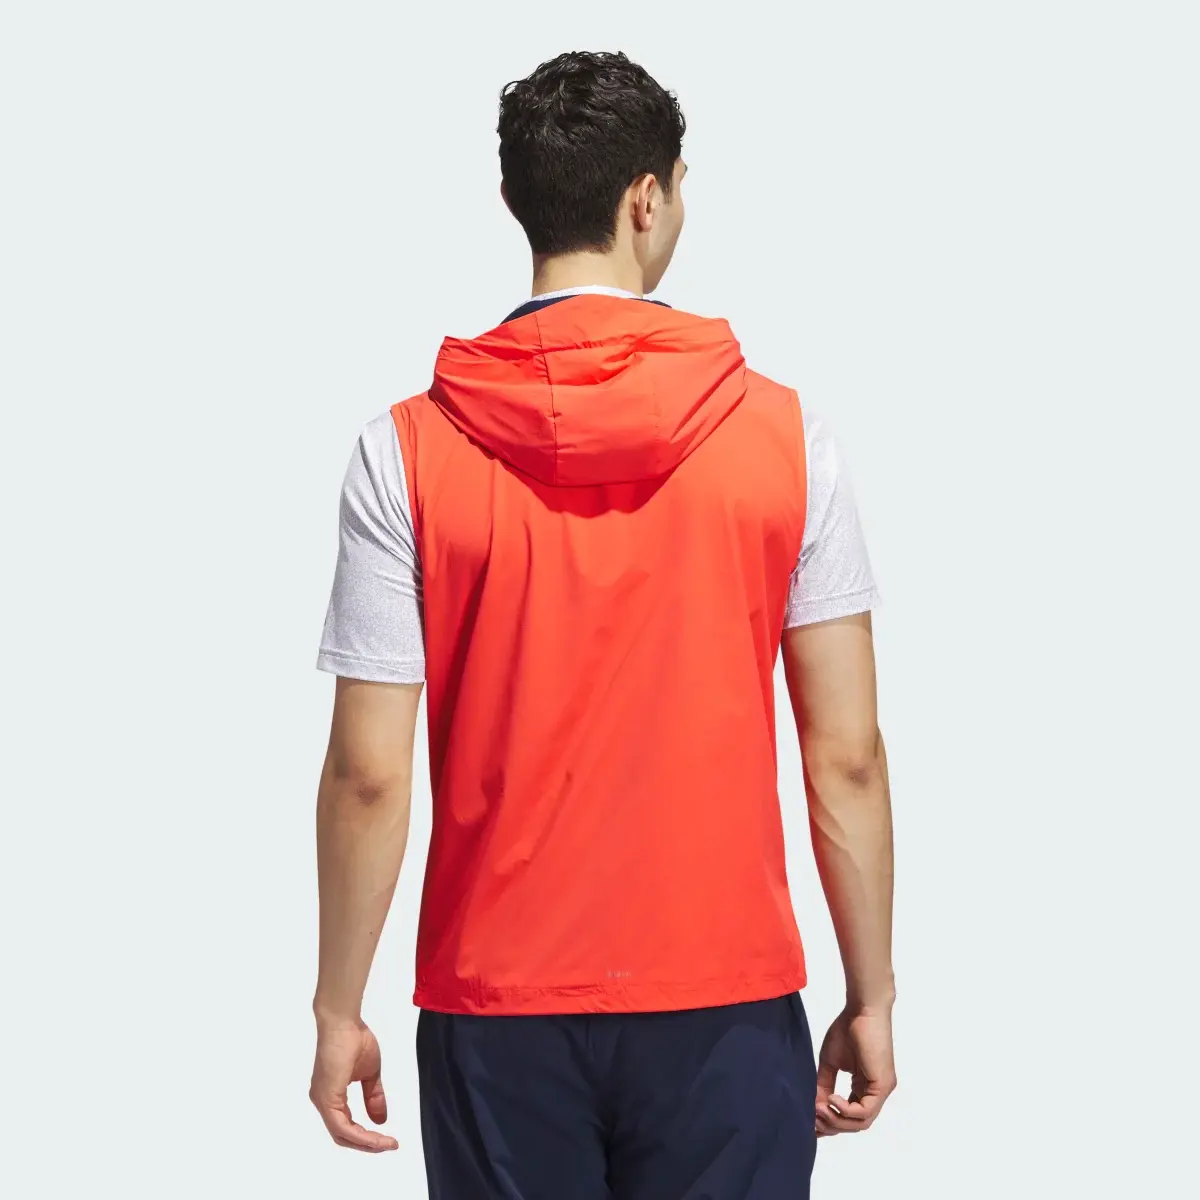 Adidas Ultimate365 Tour WIND.RDY Vest. 3